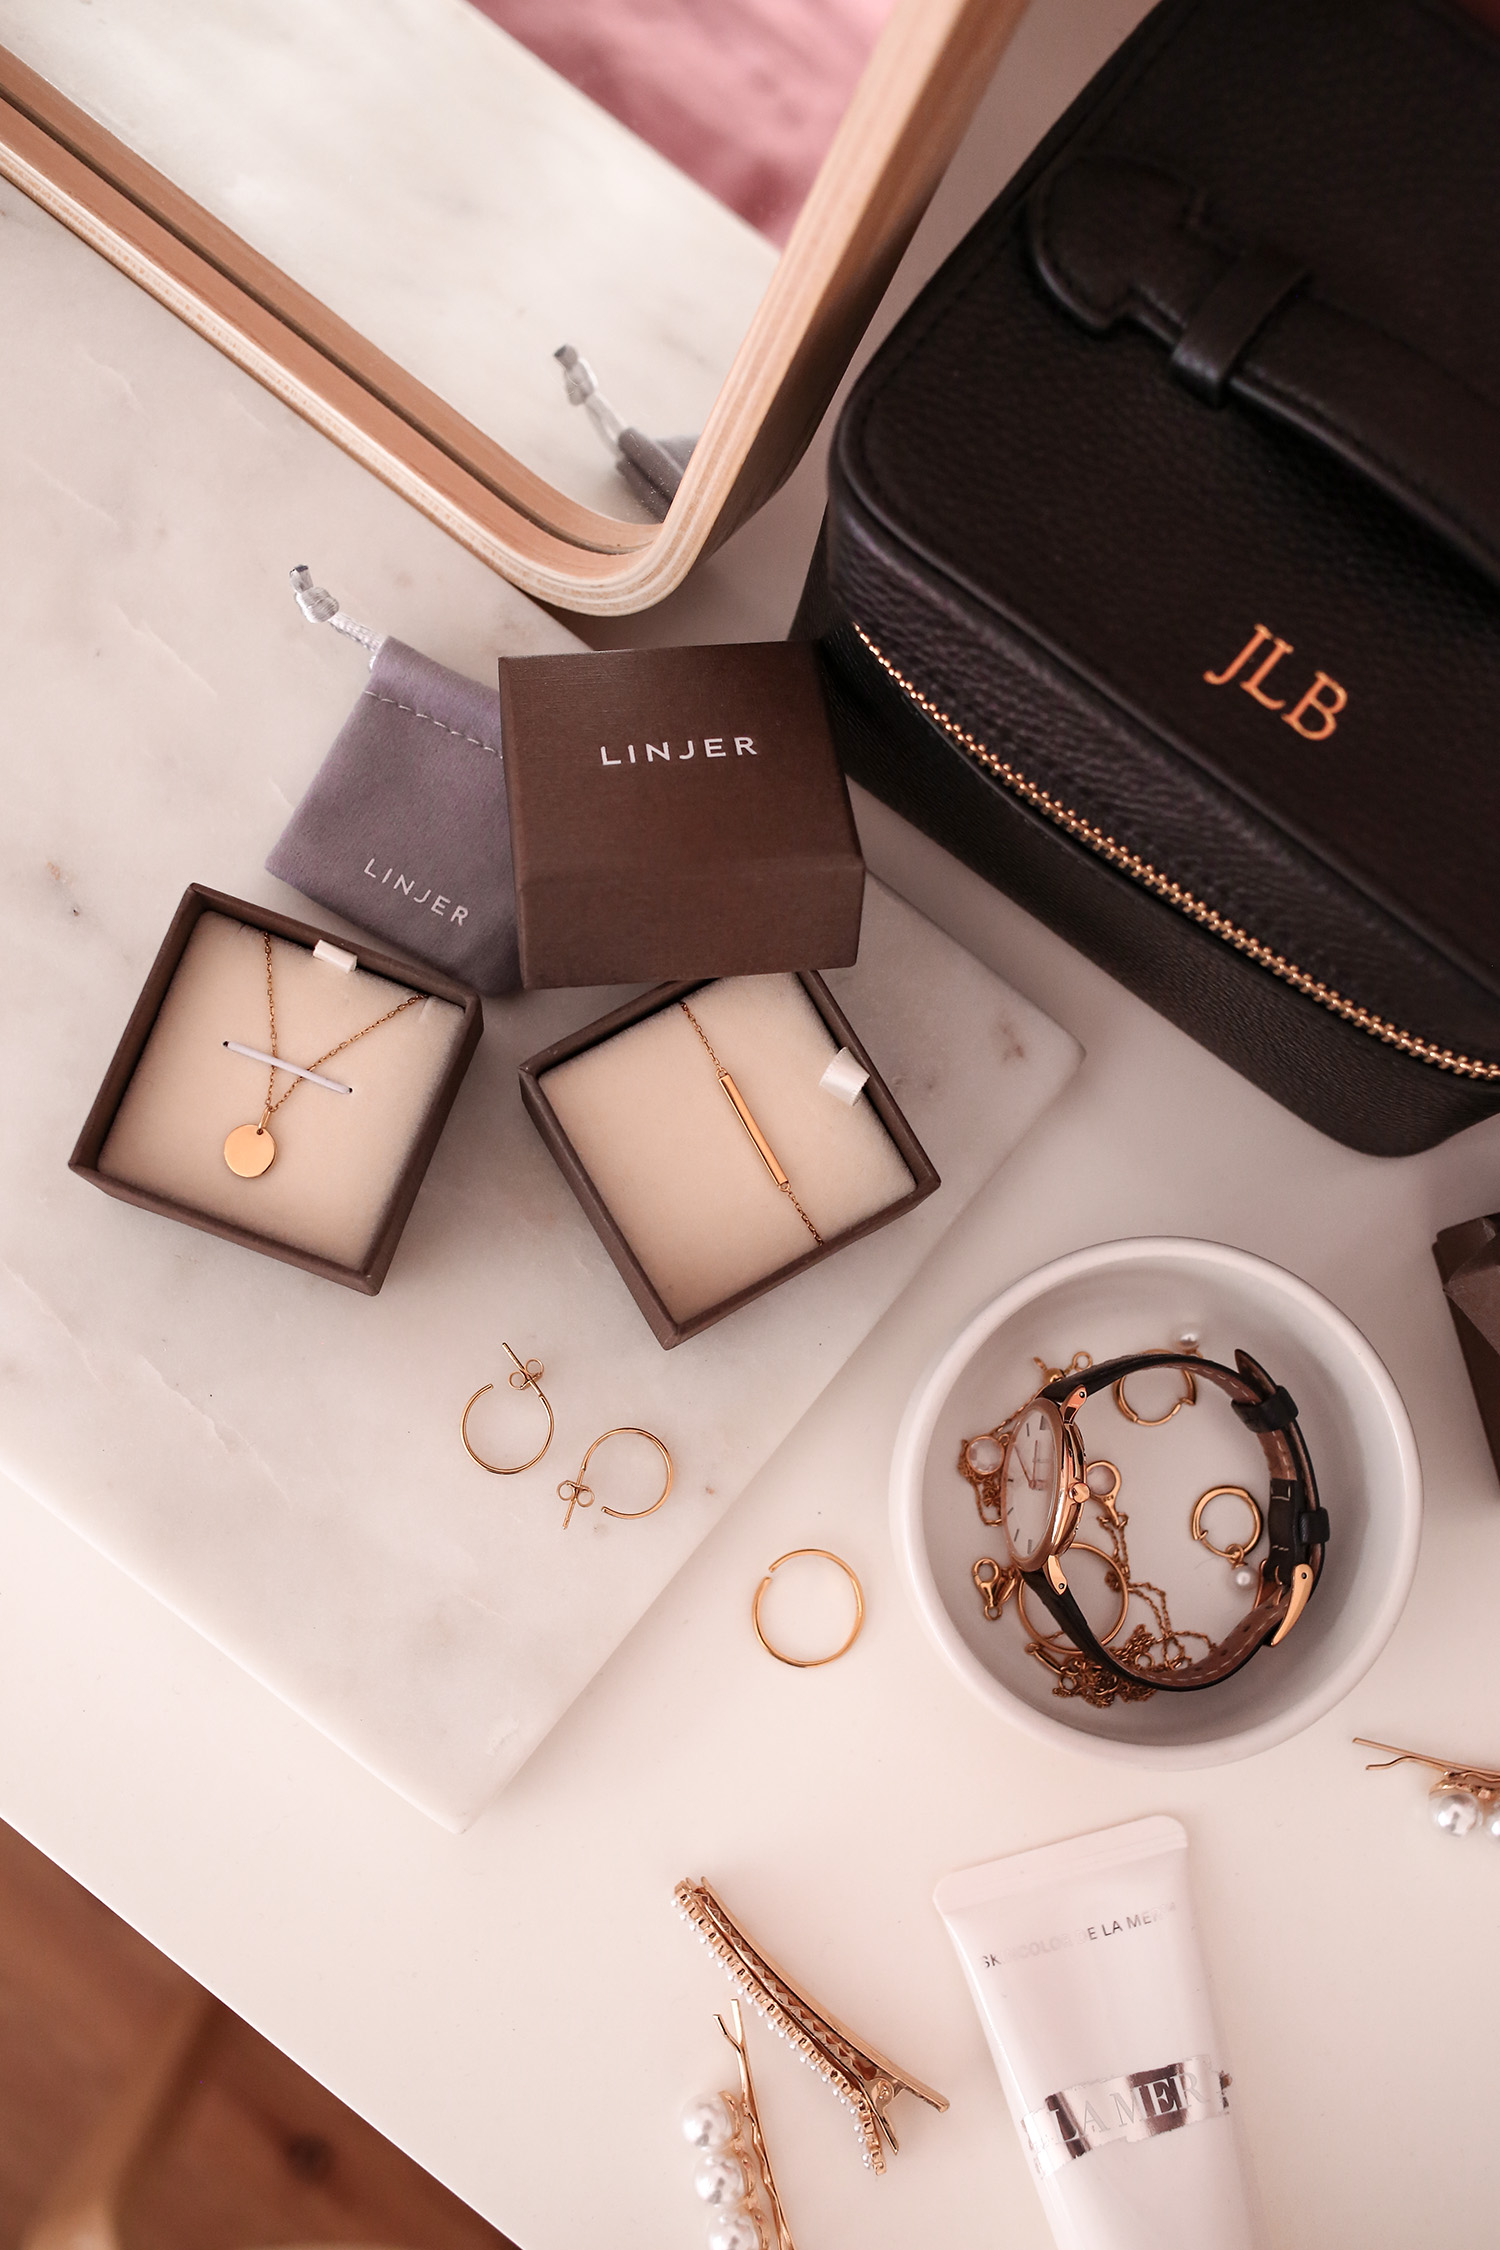 A look at Linjer’s new jewelry line